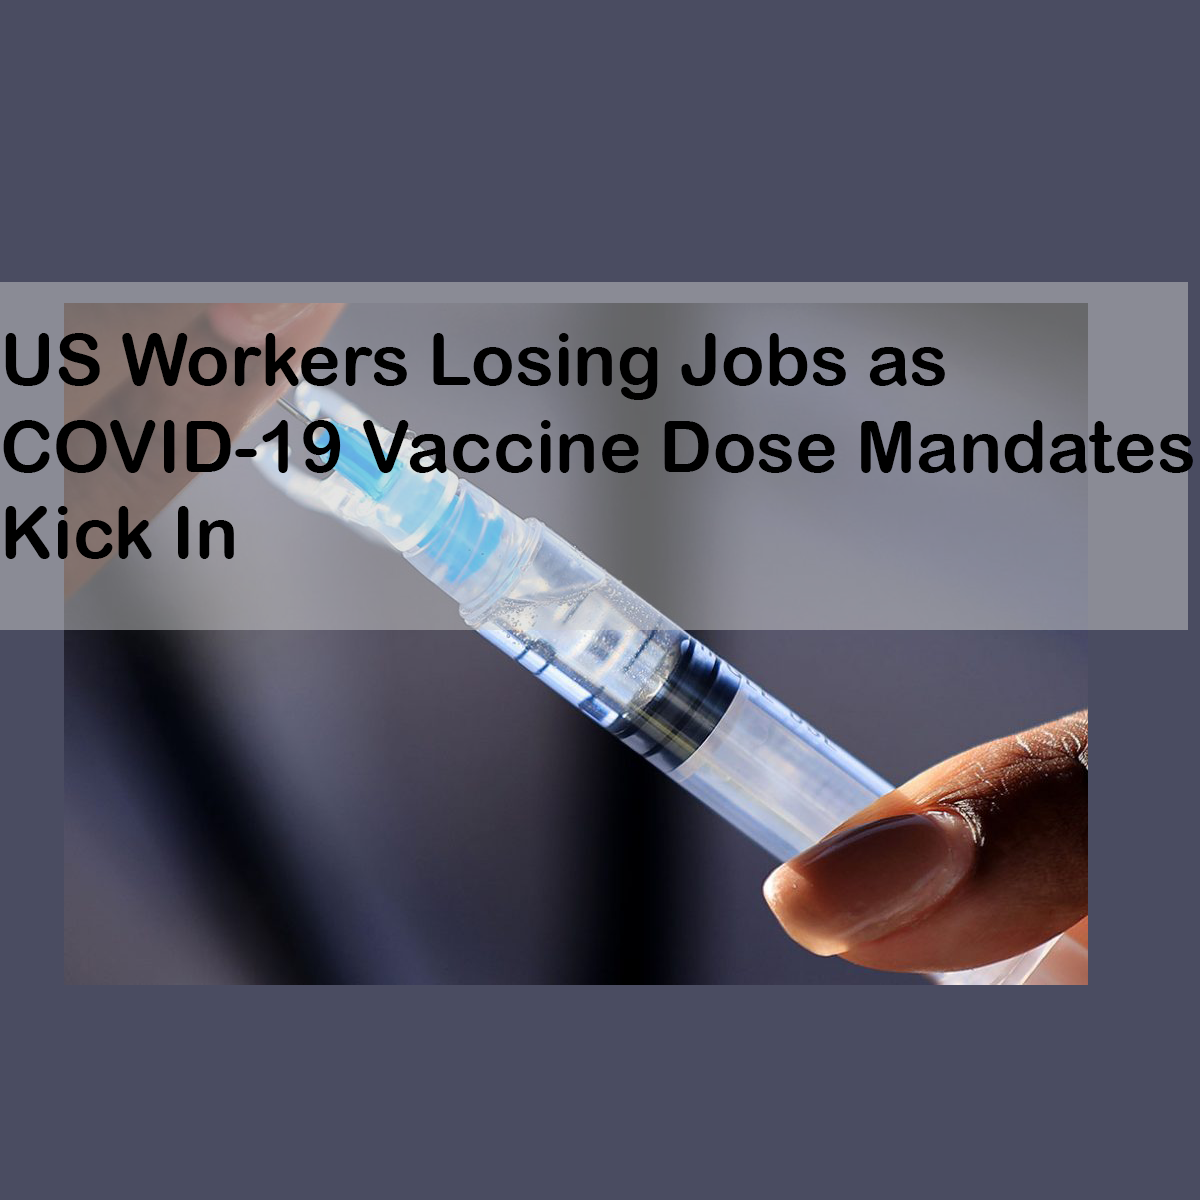 US Workers Losing Jobs as COVID-19 Vaccine Dose Mandates Kick In